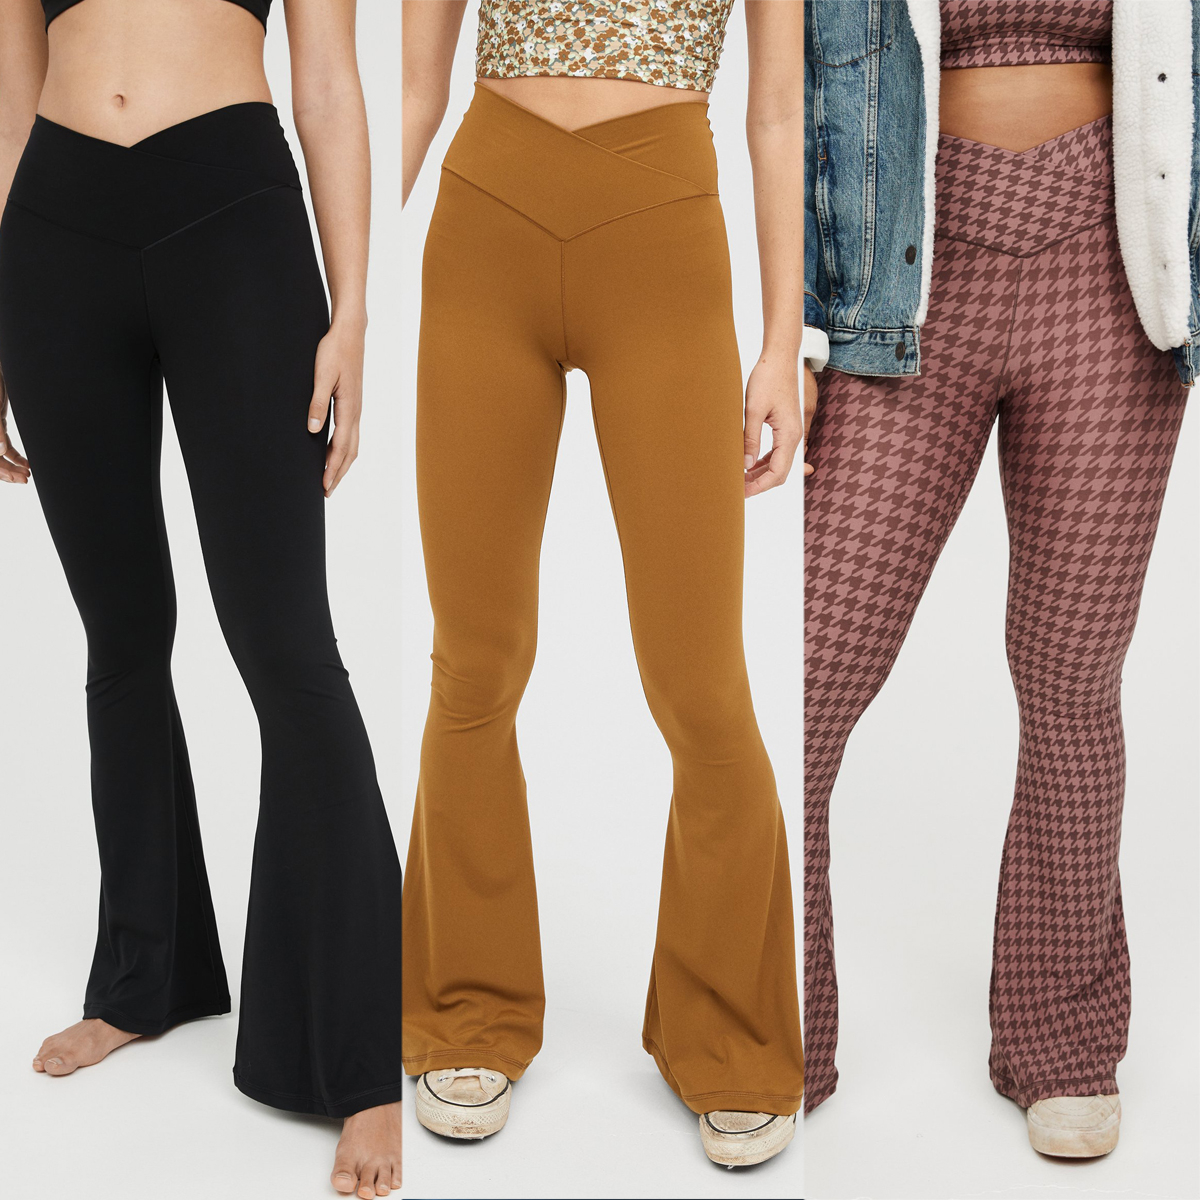 Why You Need Aerie's Crossover Flare Leggings in Your Life - Verve times